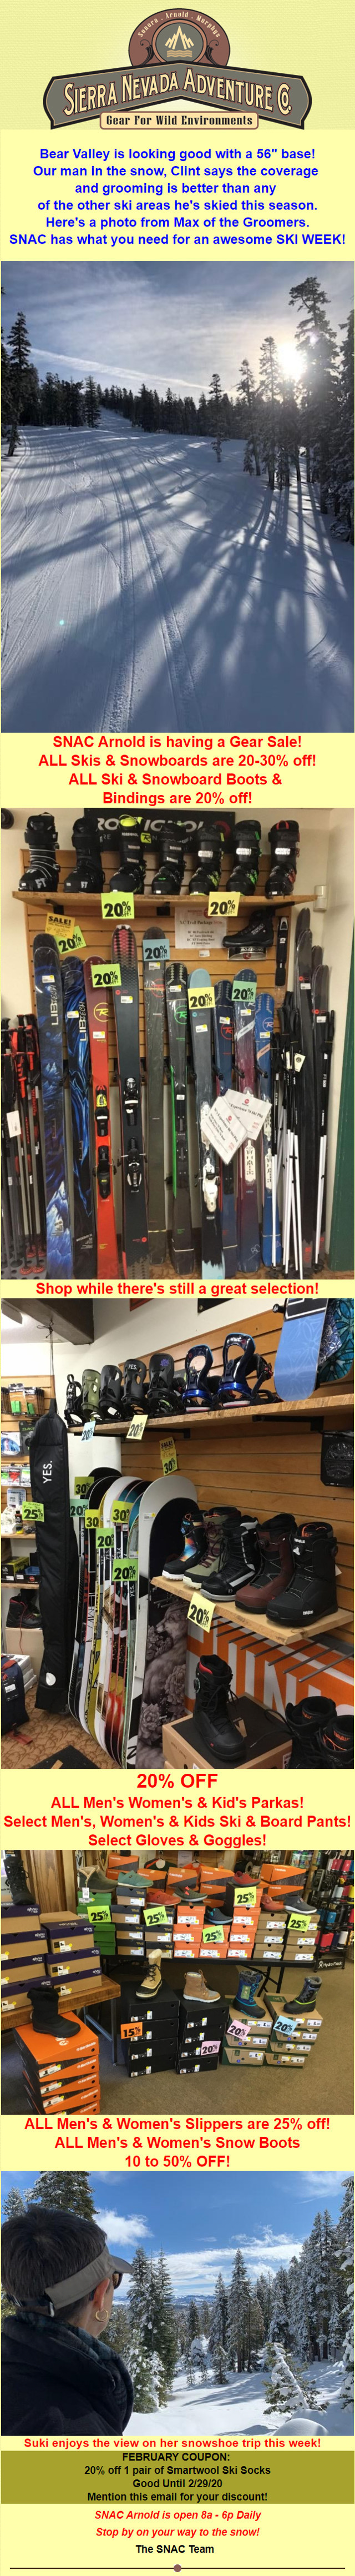 SNAC’s Big President’s Weekend Sale at Your Winter Equipment Headquarters!